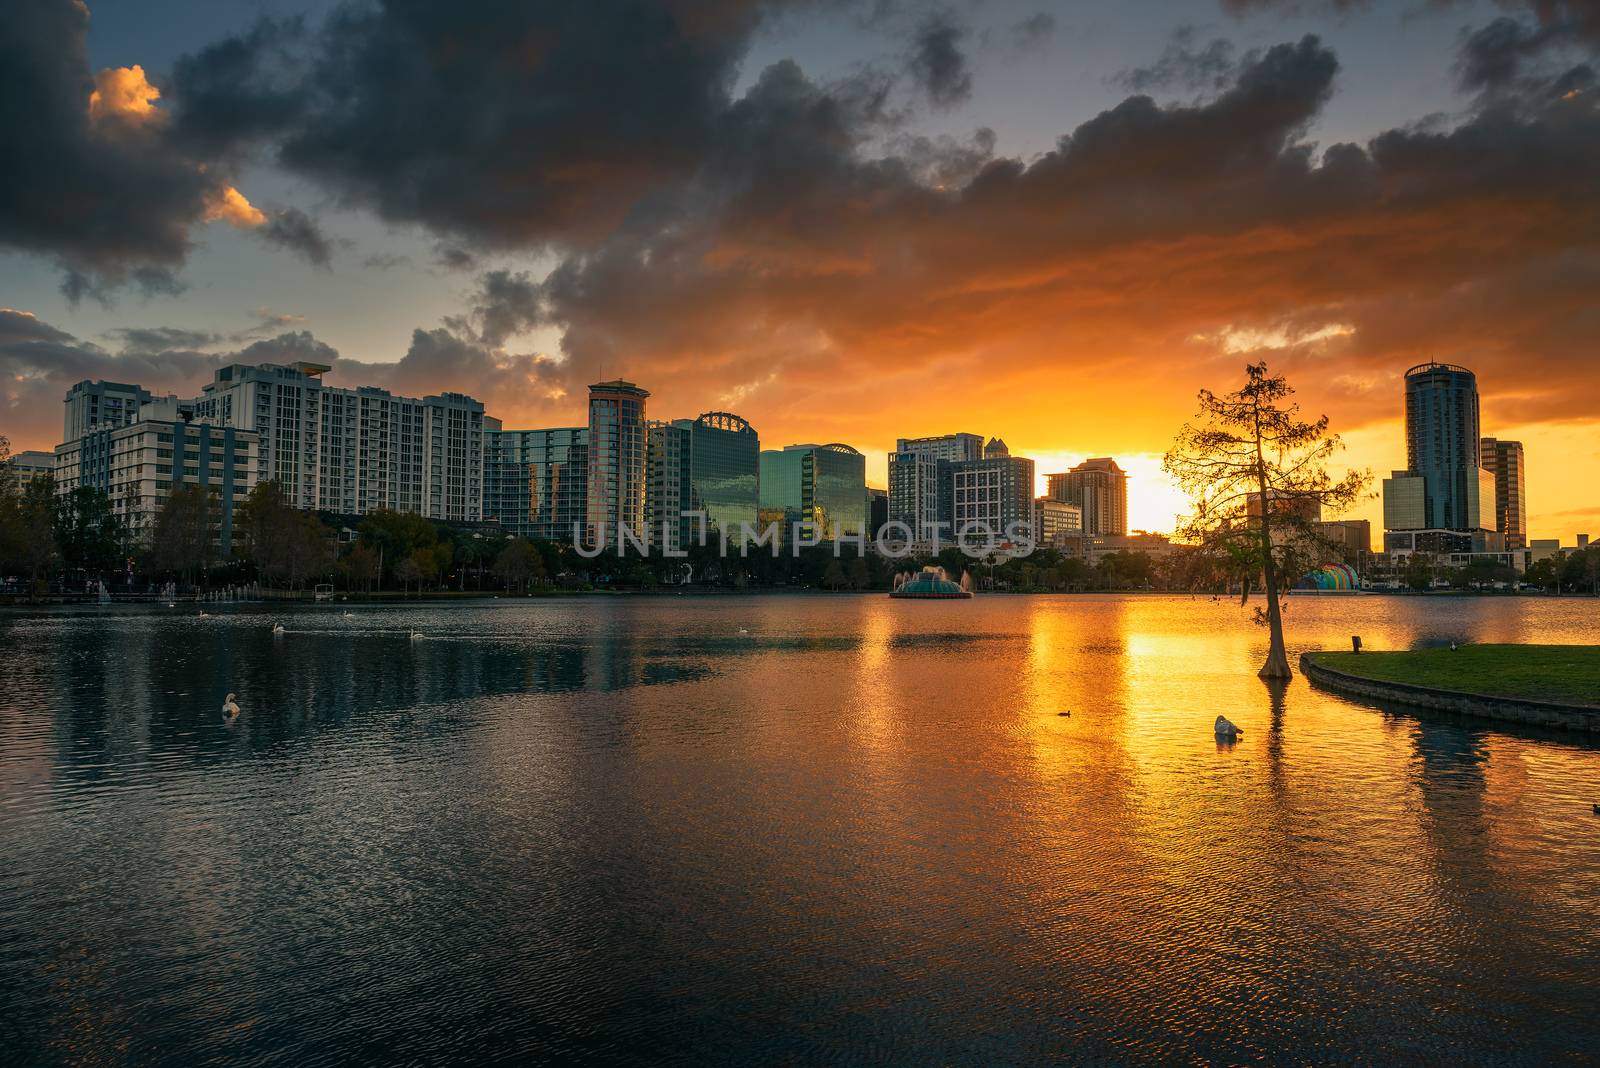 Colorful sunset above Lake Eola and city skyline viewed from the Eola Park in Orlando, Florida.